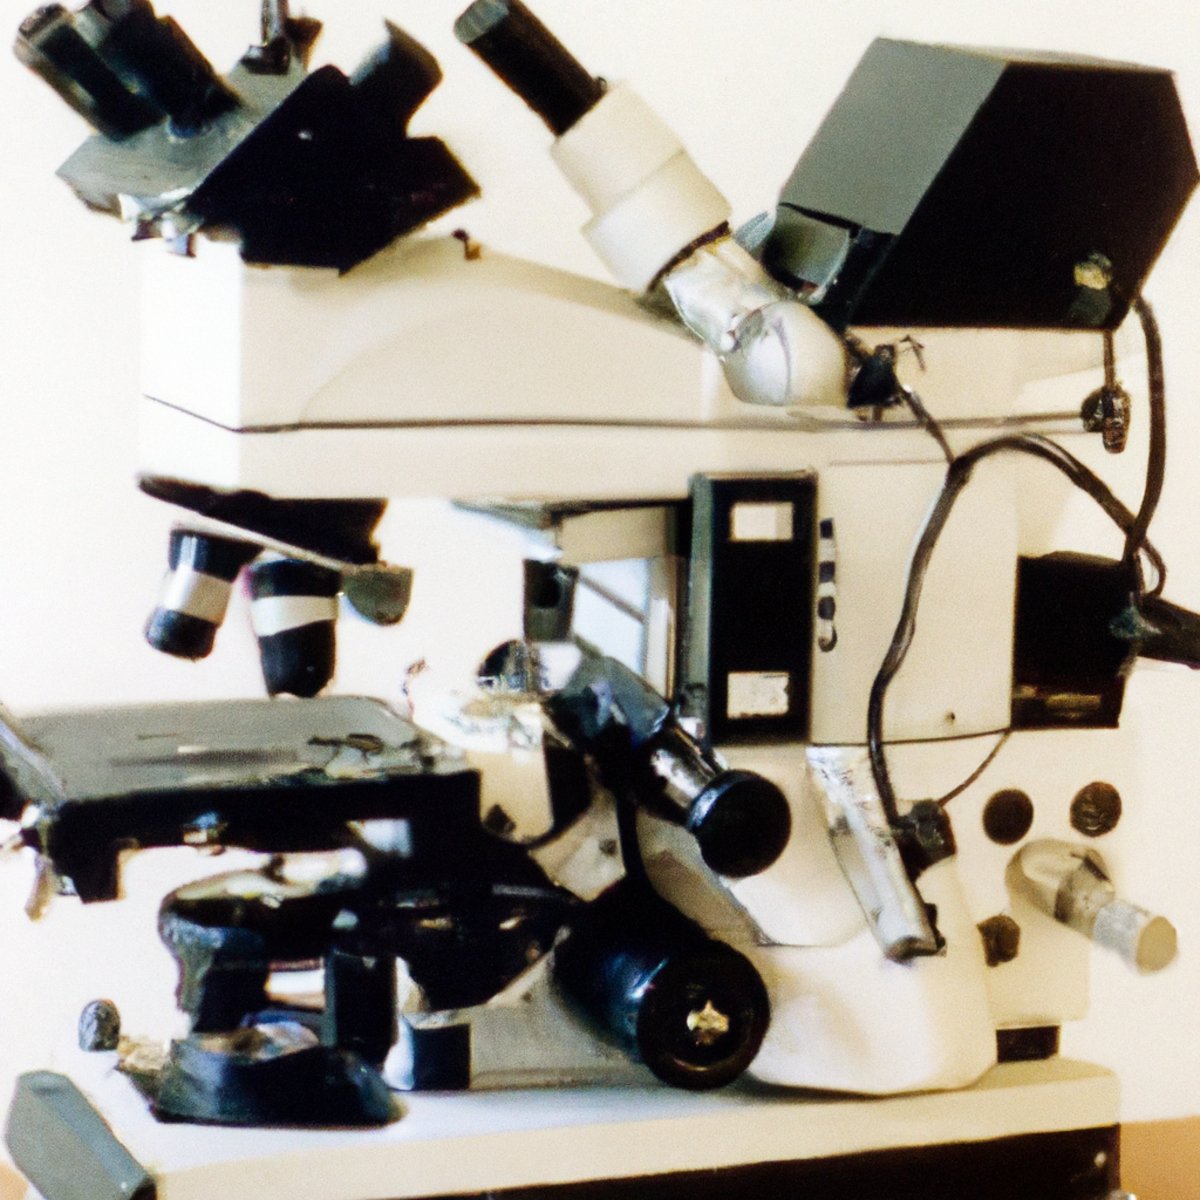 Close-up of laboratory microscope with intricate details, test tubes, and petri dishes, symbolizing scientific research on Jansen's Metaphyseal Chondrodysplasia.